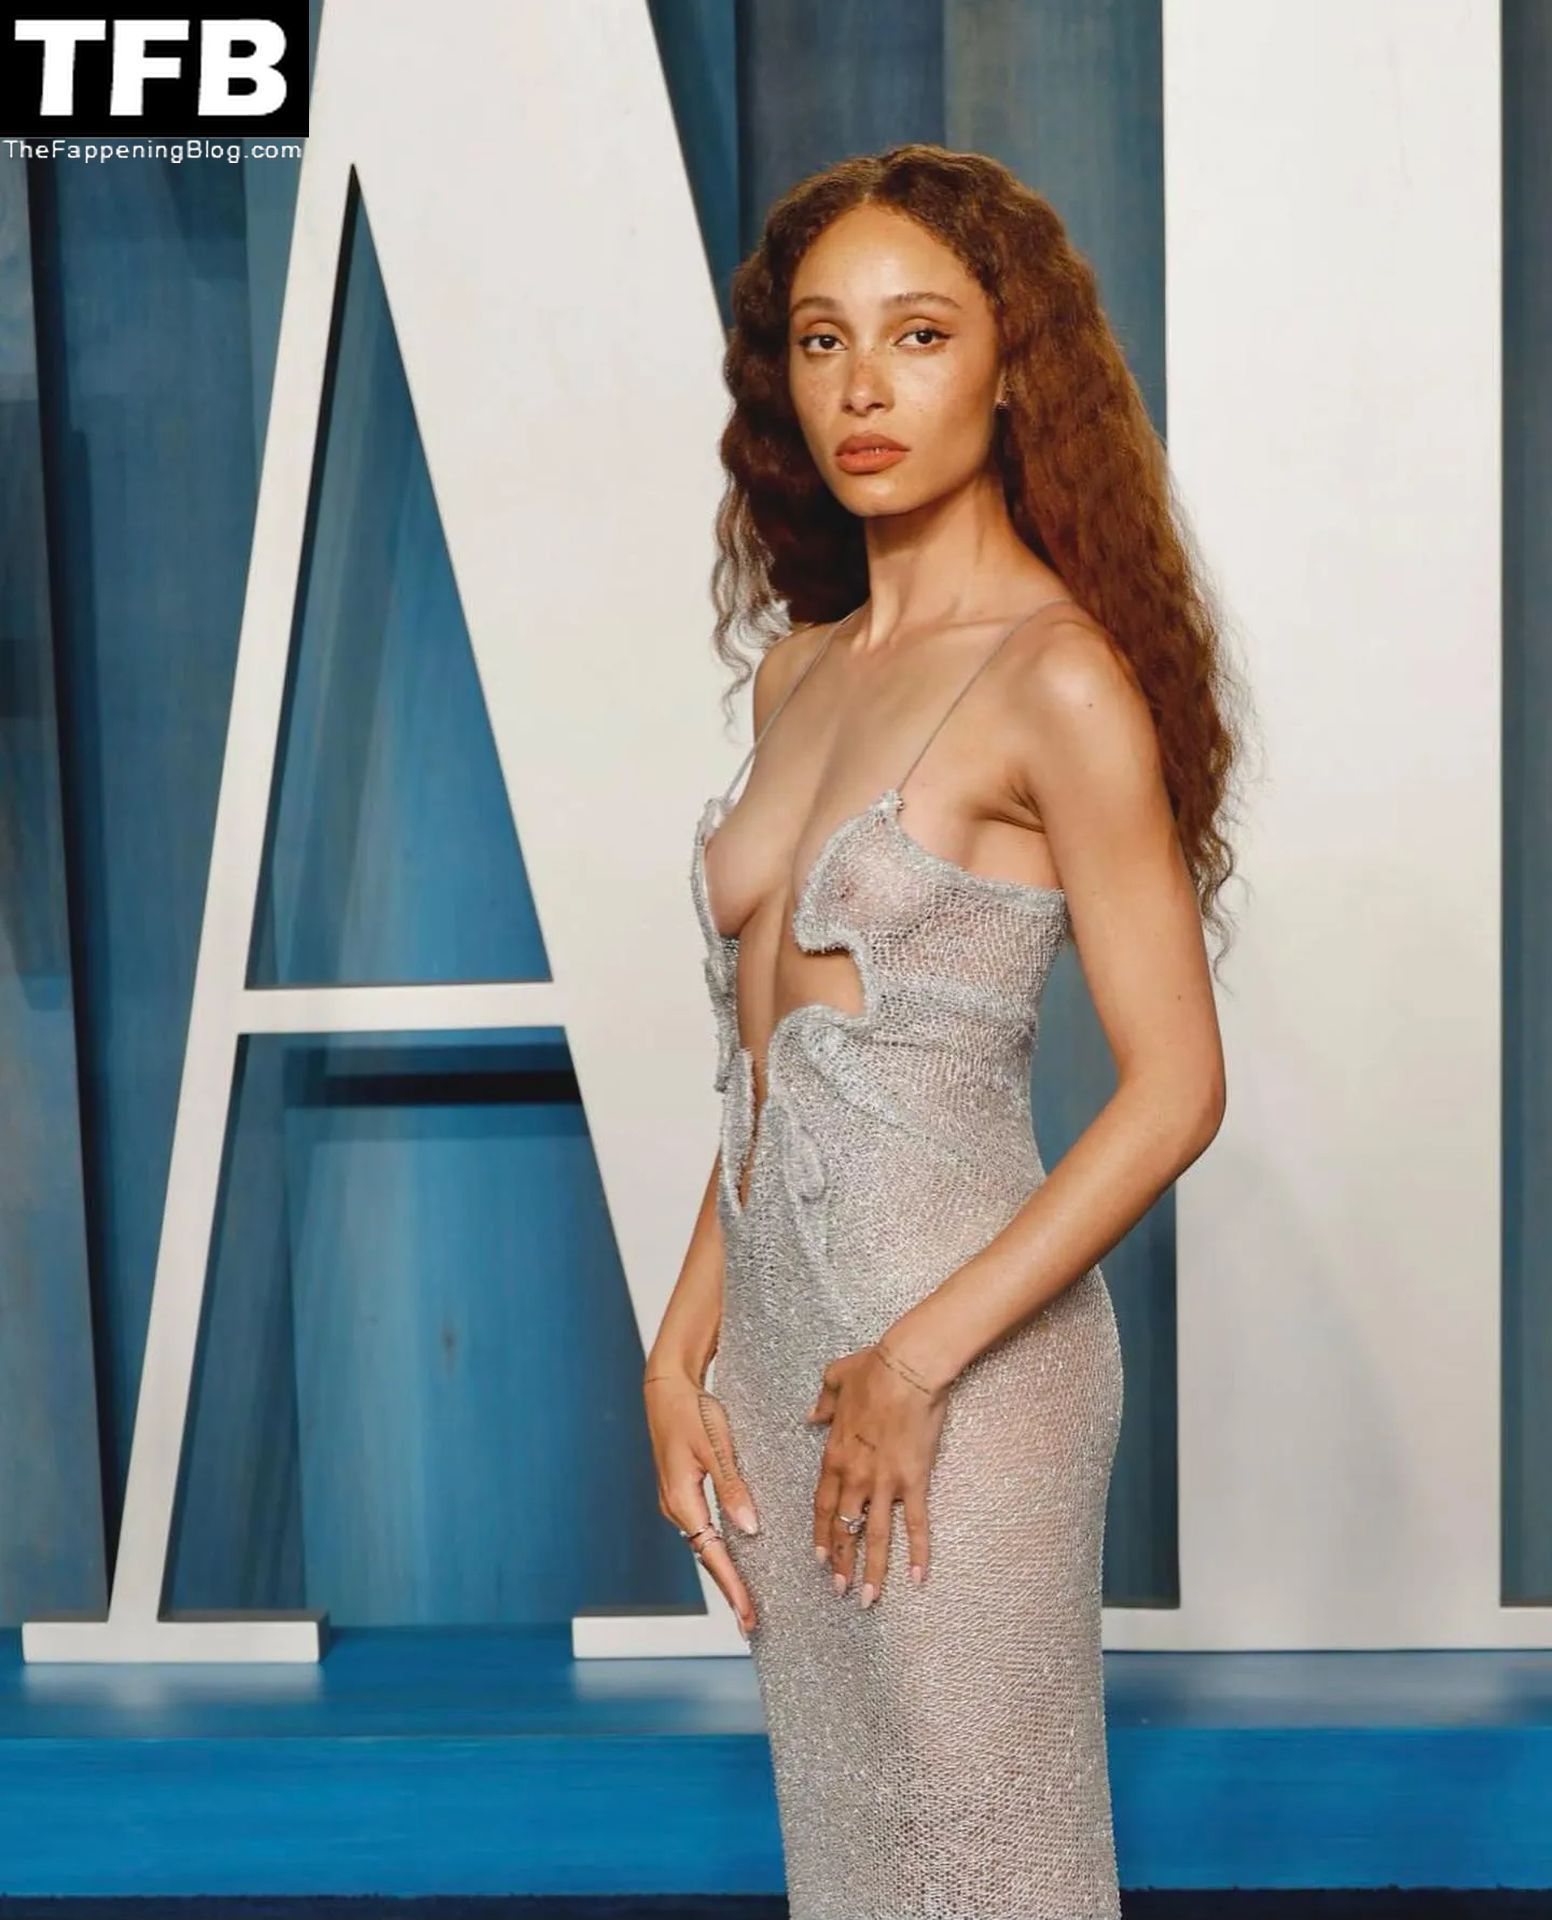 Adwoa-Aboah-Nude-See-Through-The-Fappening-Blog-2.jpg